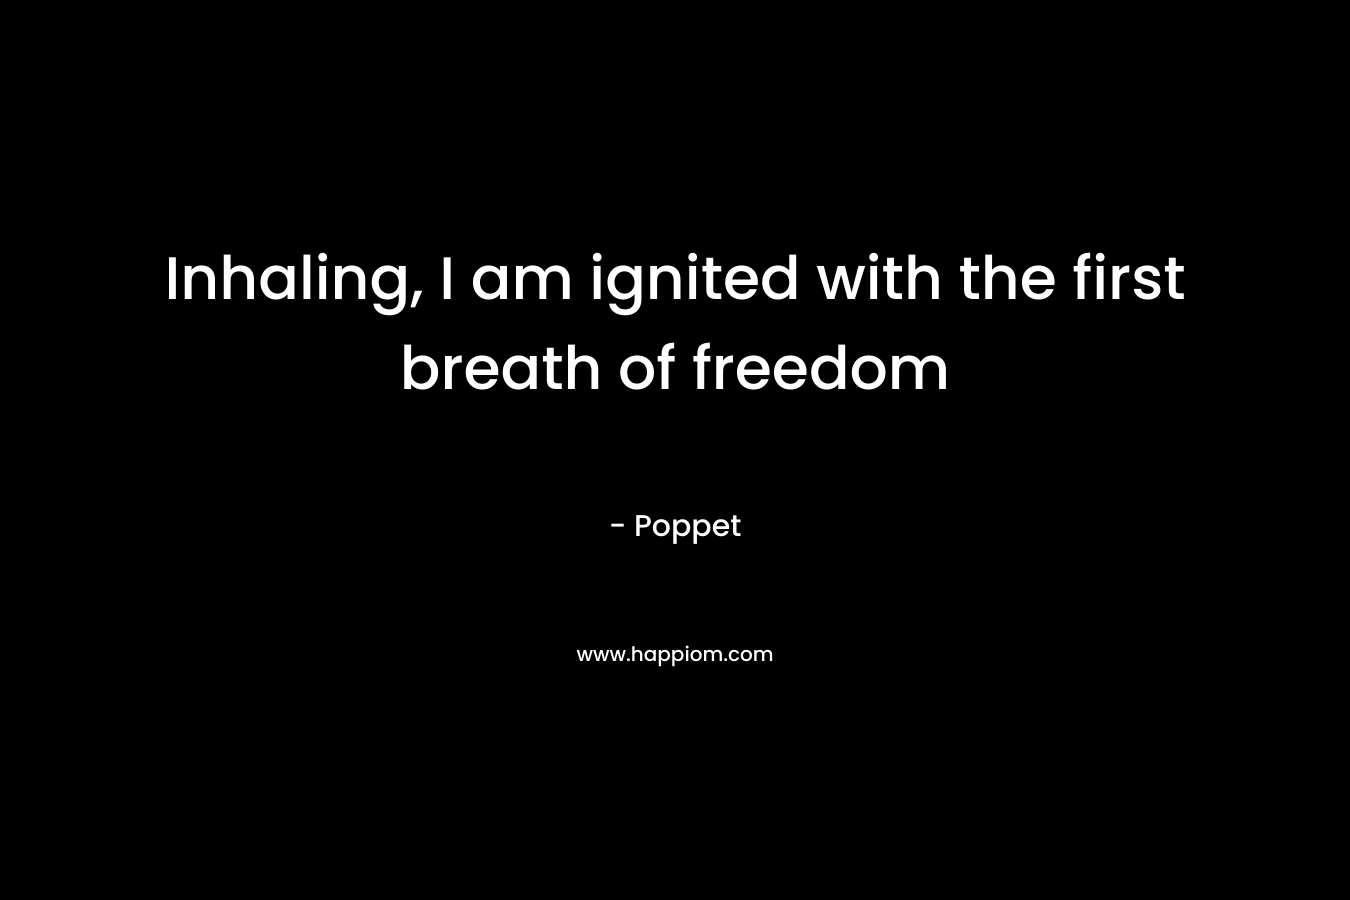 Inhaling, I am ignited with the first breath of freedom